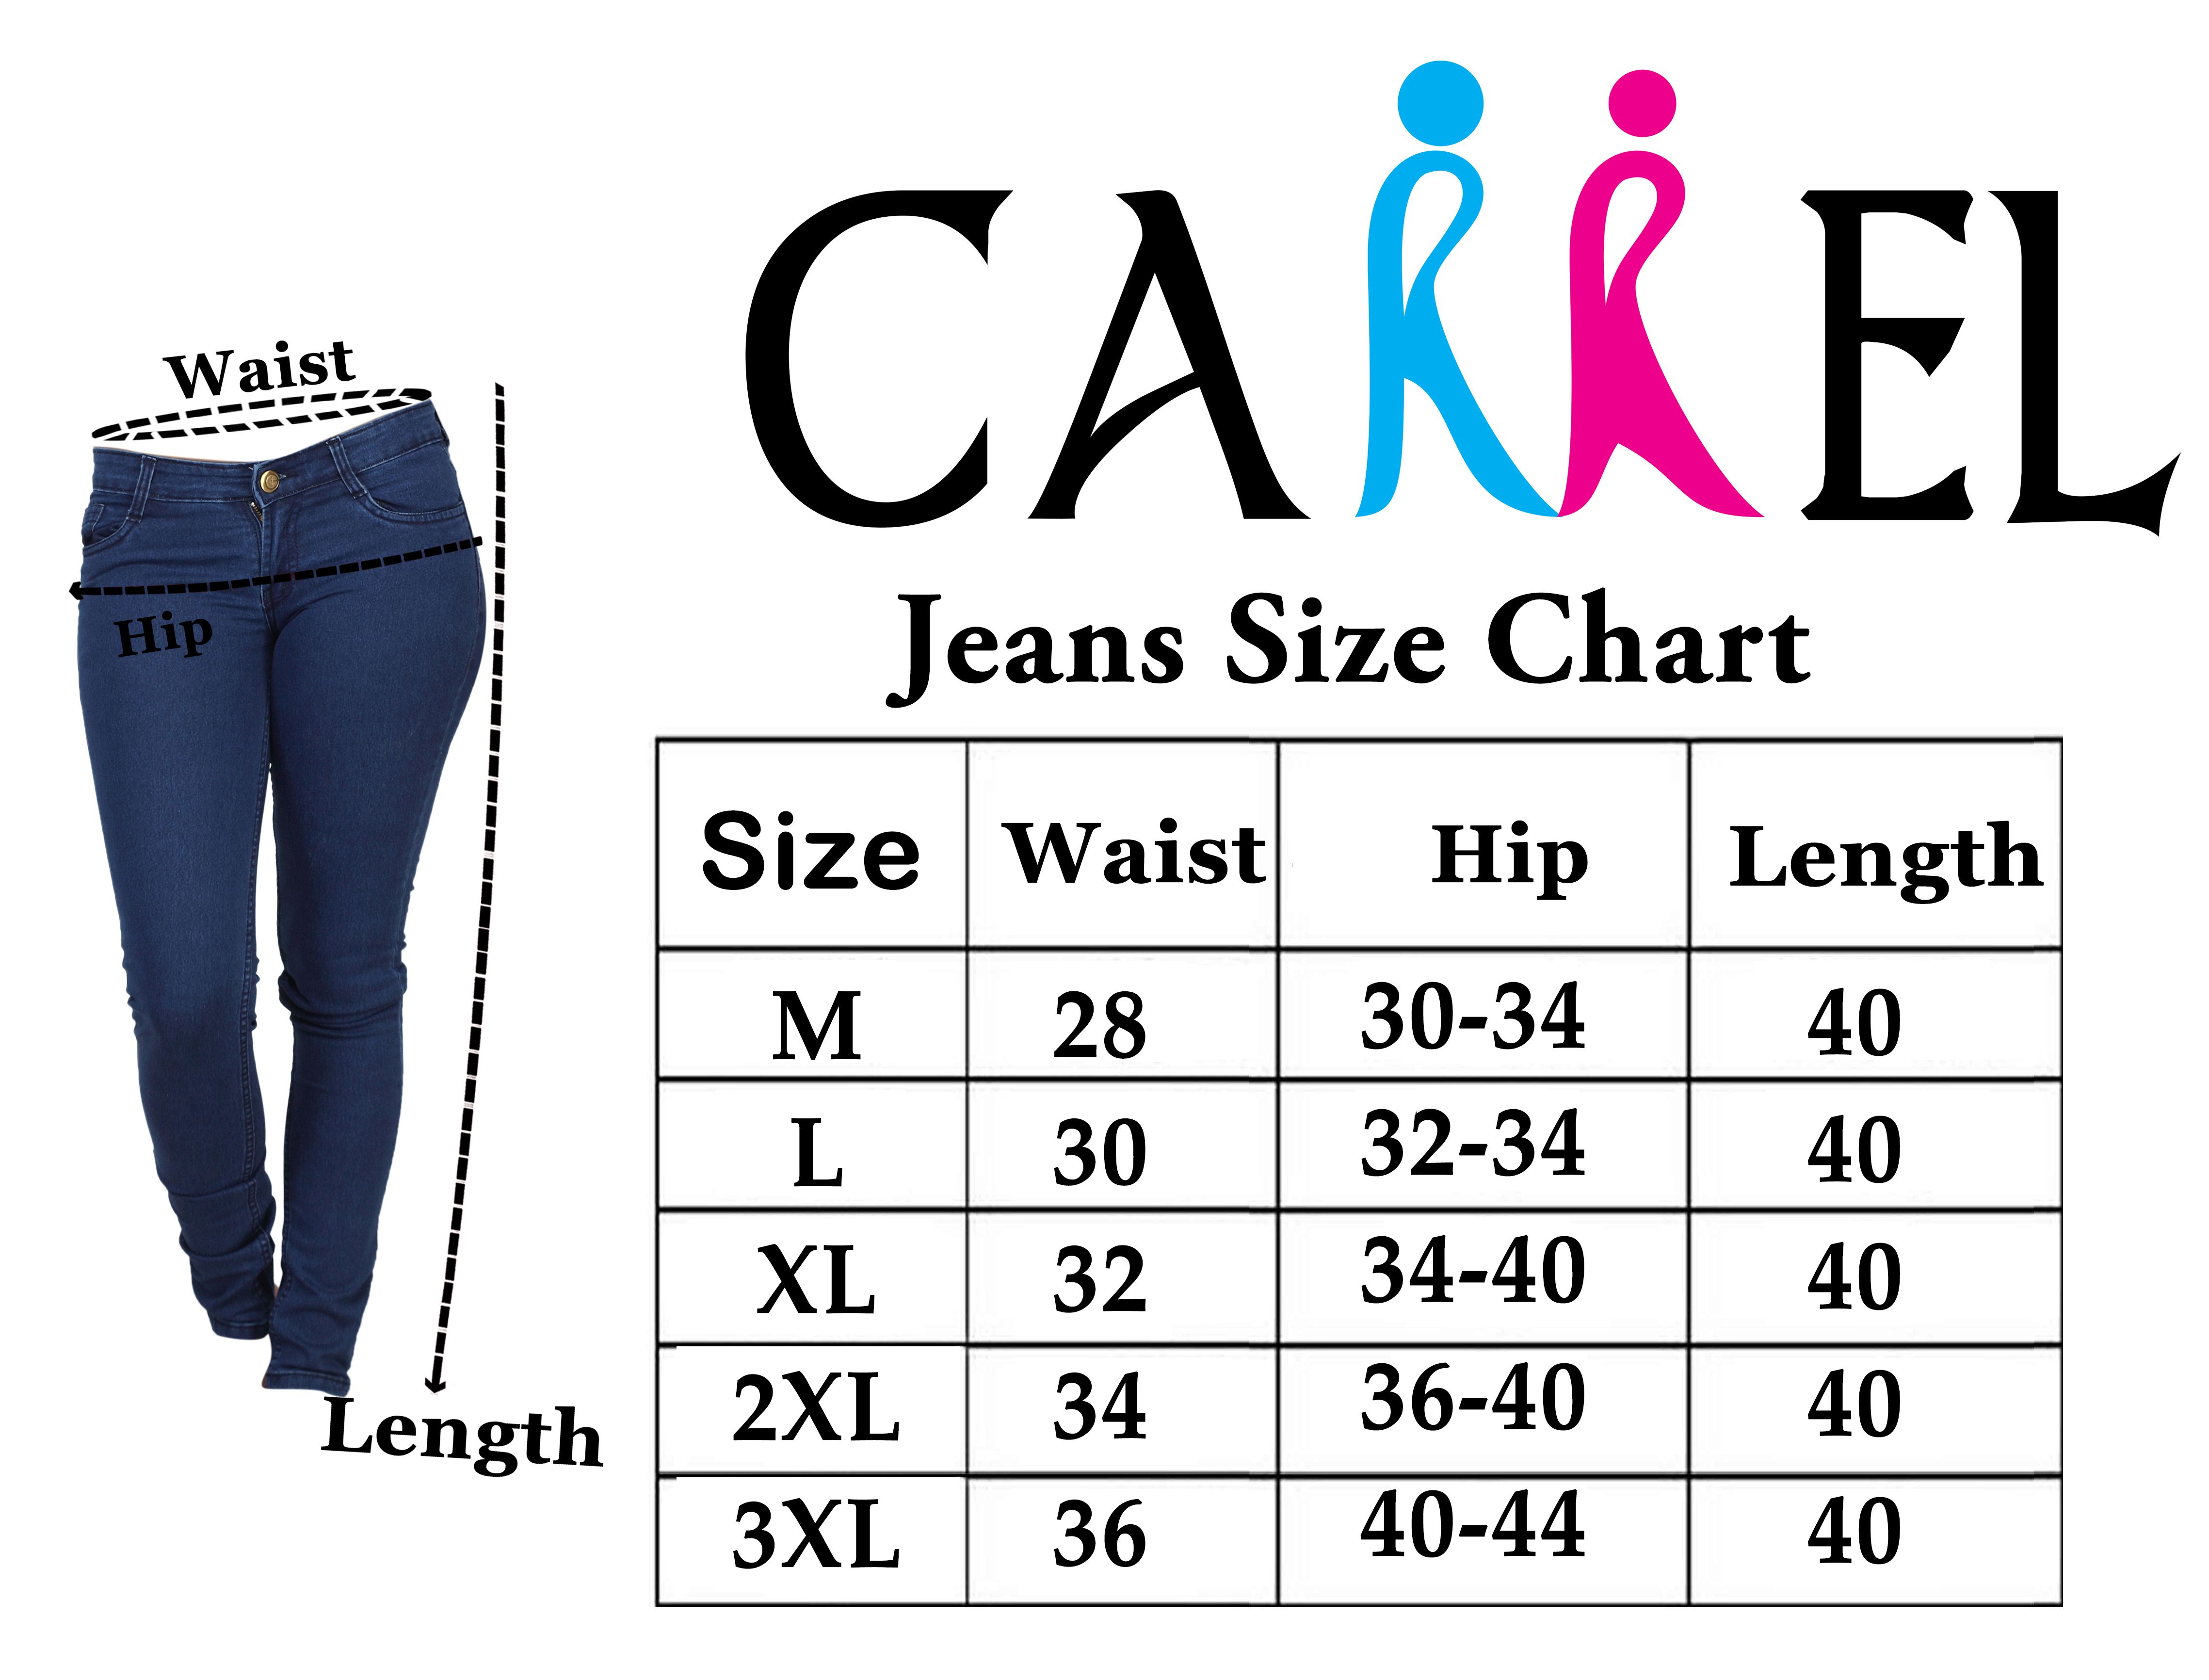 Buy Carrel Denim Jeans Online At Best Prices In India Snapdeal